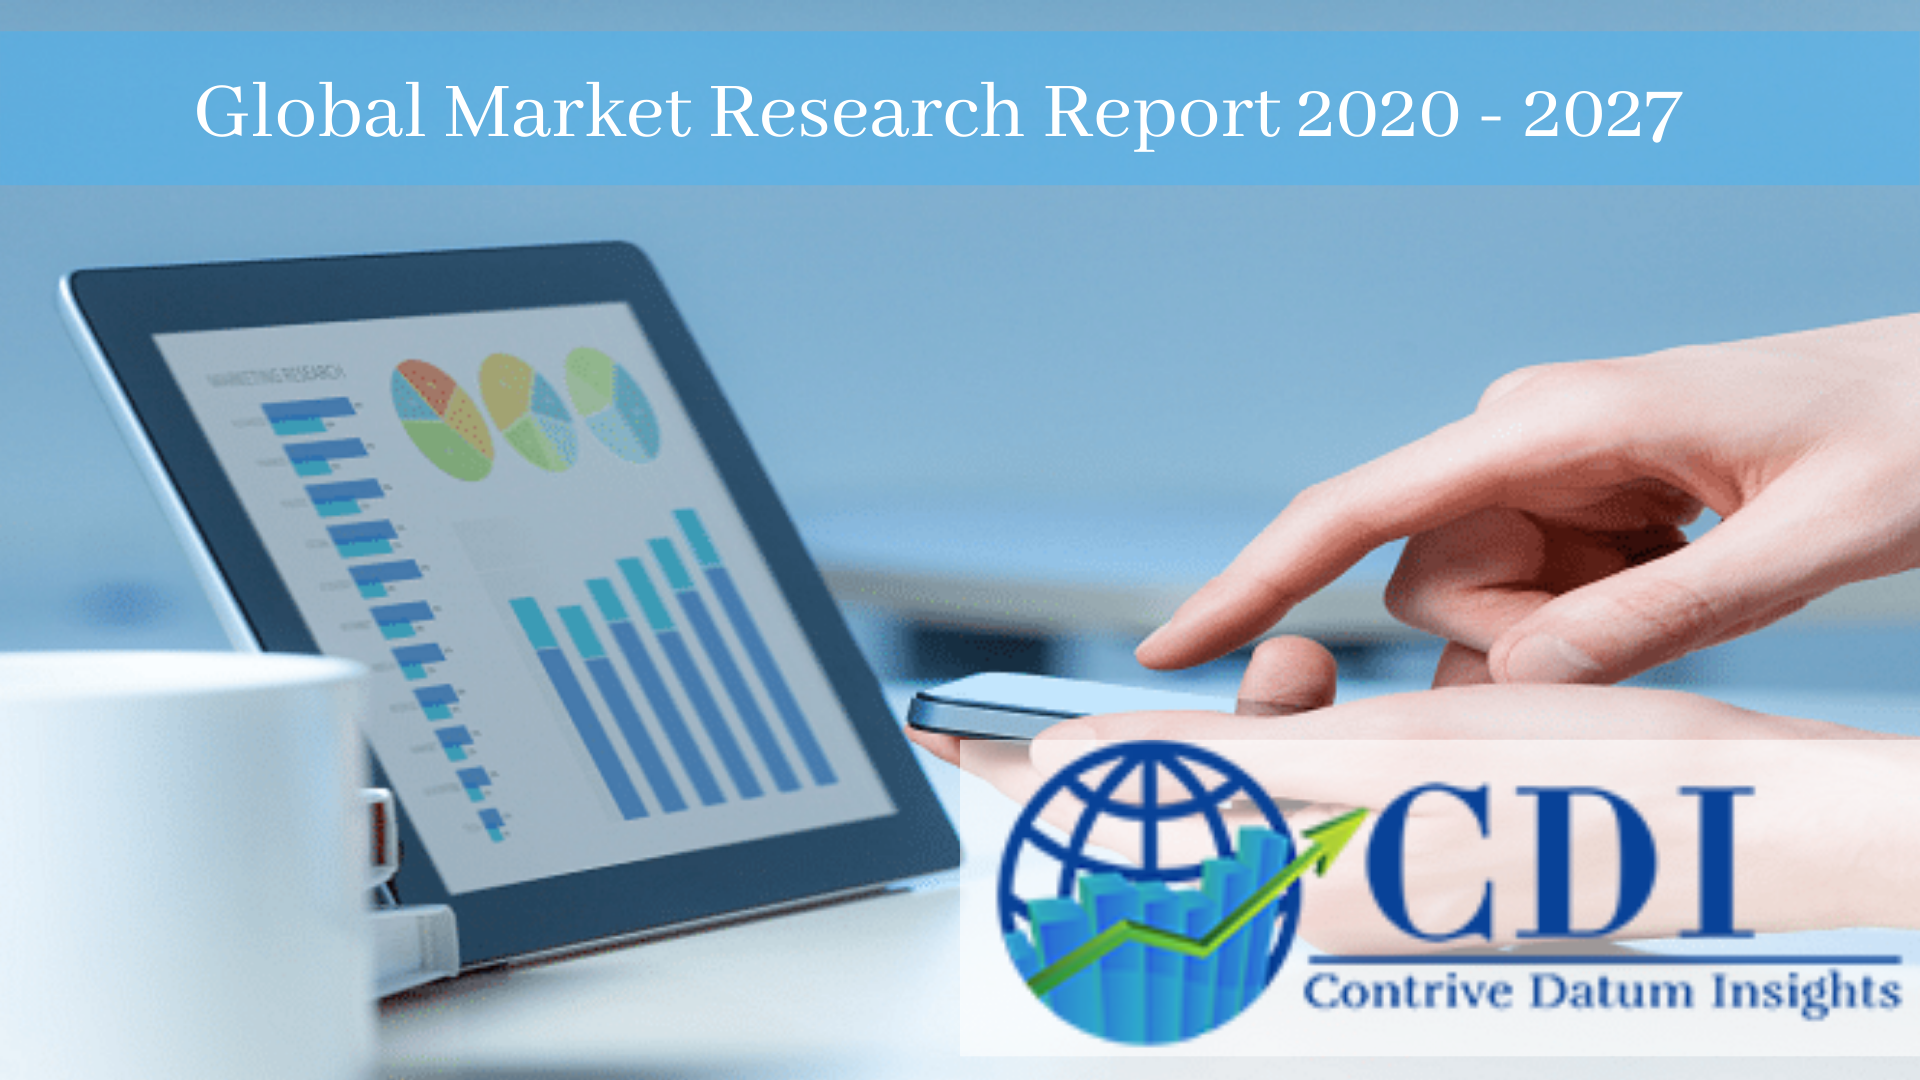 Hair Care Market 2020 Covid-19 Impact Analysis, Trends and Forecasts to 2027 | Henkel, Procter Gamble, L’Oreal, Unilever